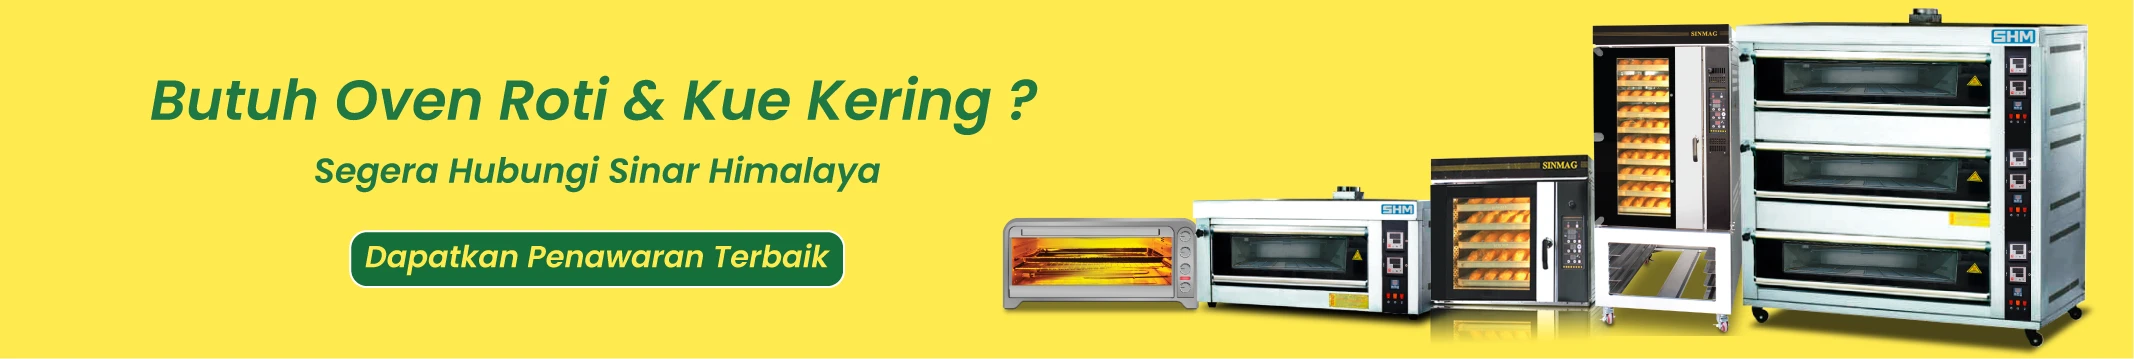 CTA Banner Convection Oven